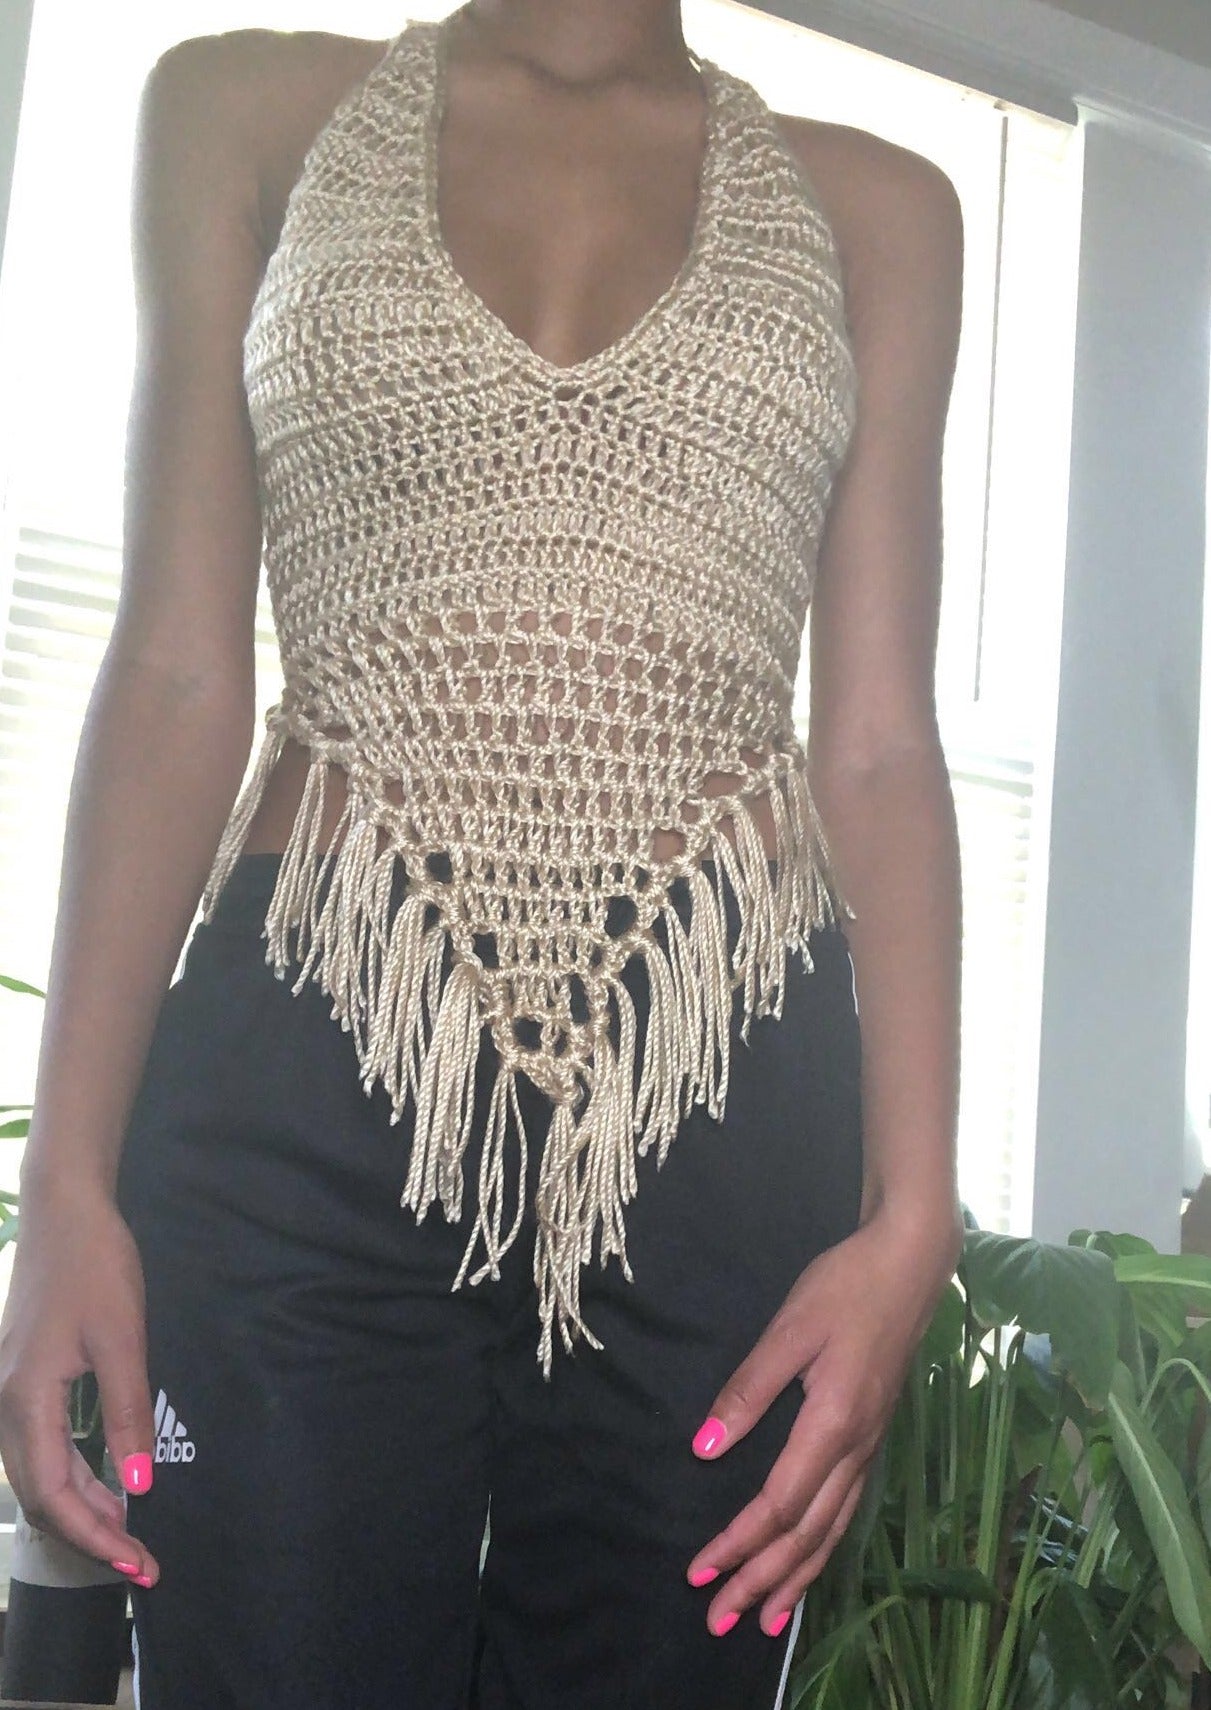 Diamond Bralette Top with Fringes